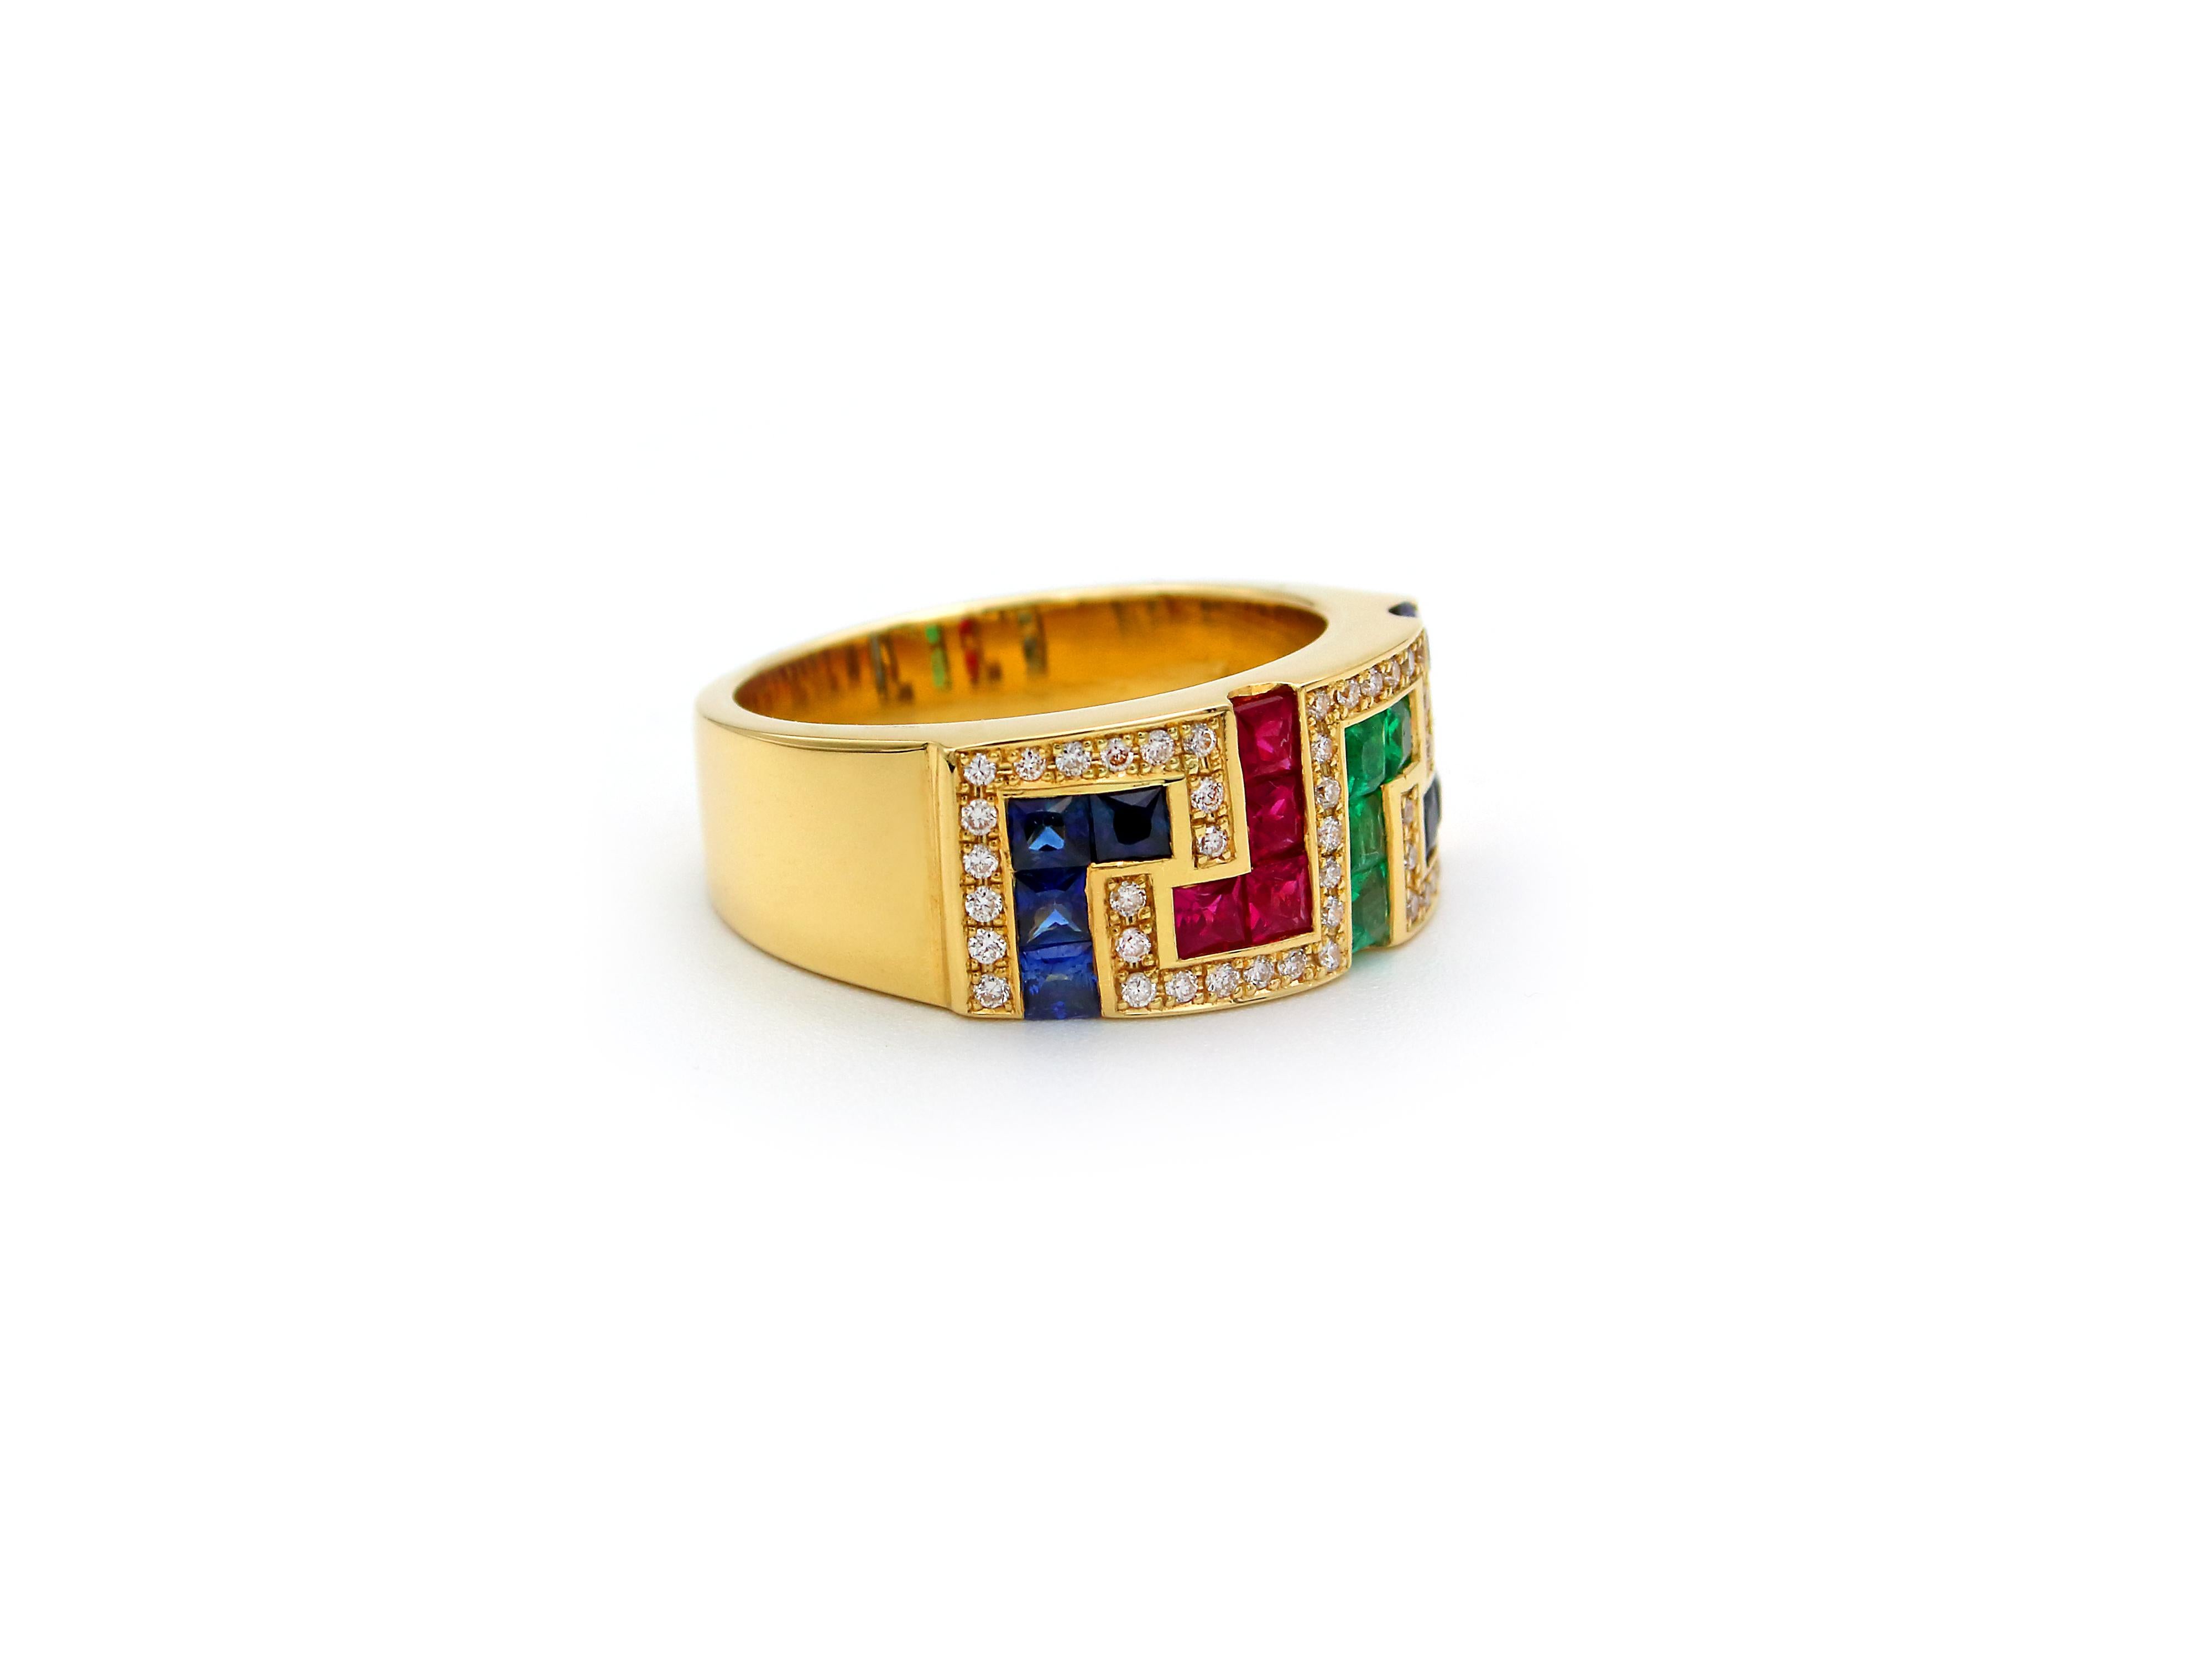 Band ring in 18 karats yellow gold set with colorful gems, 1.60 carats of Rubies, Emeralds and Sapphires. The frame around it is the pave setting with 0.40 carats brilliant cut diamonds that adds light and luxury to the piece.

DIMENSIONS
Band top